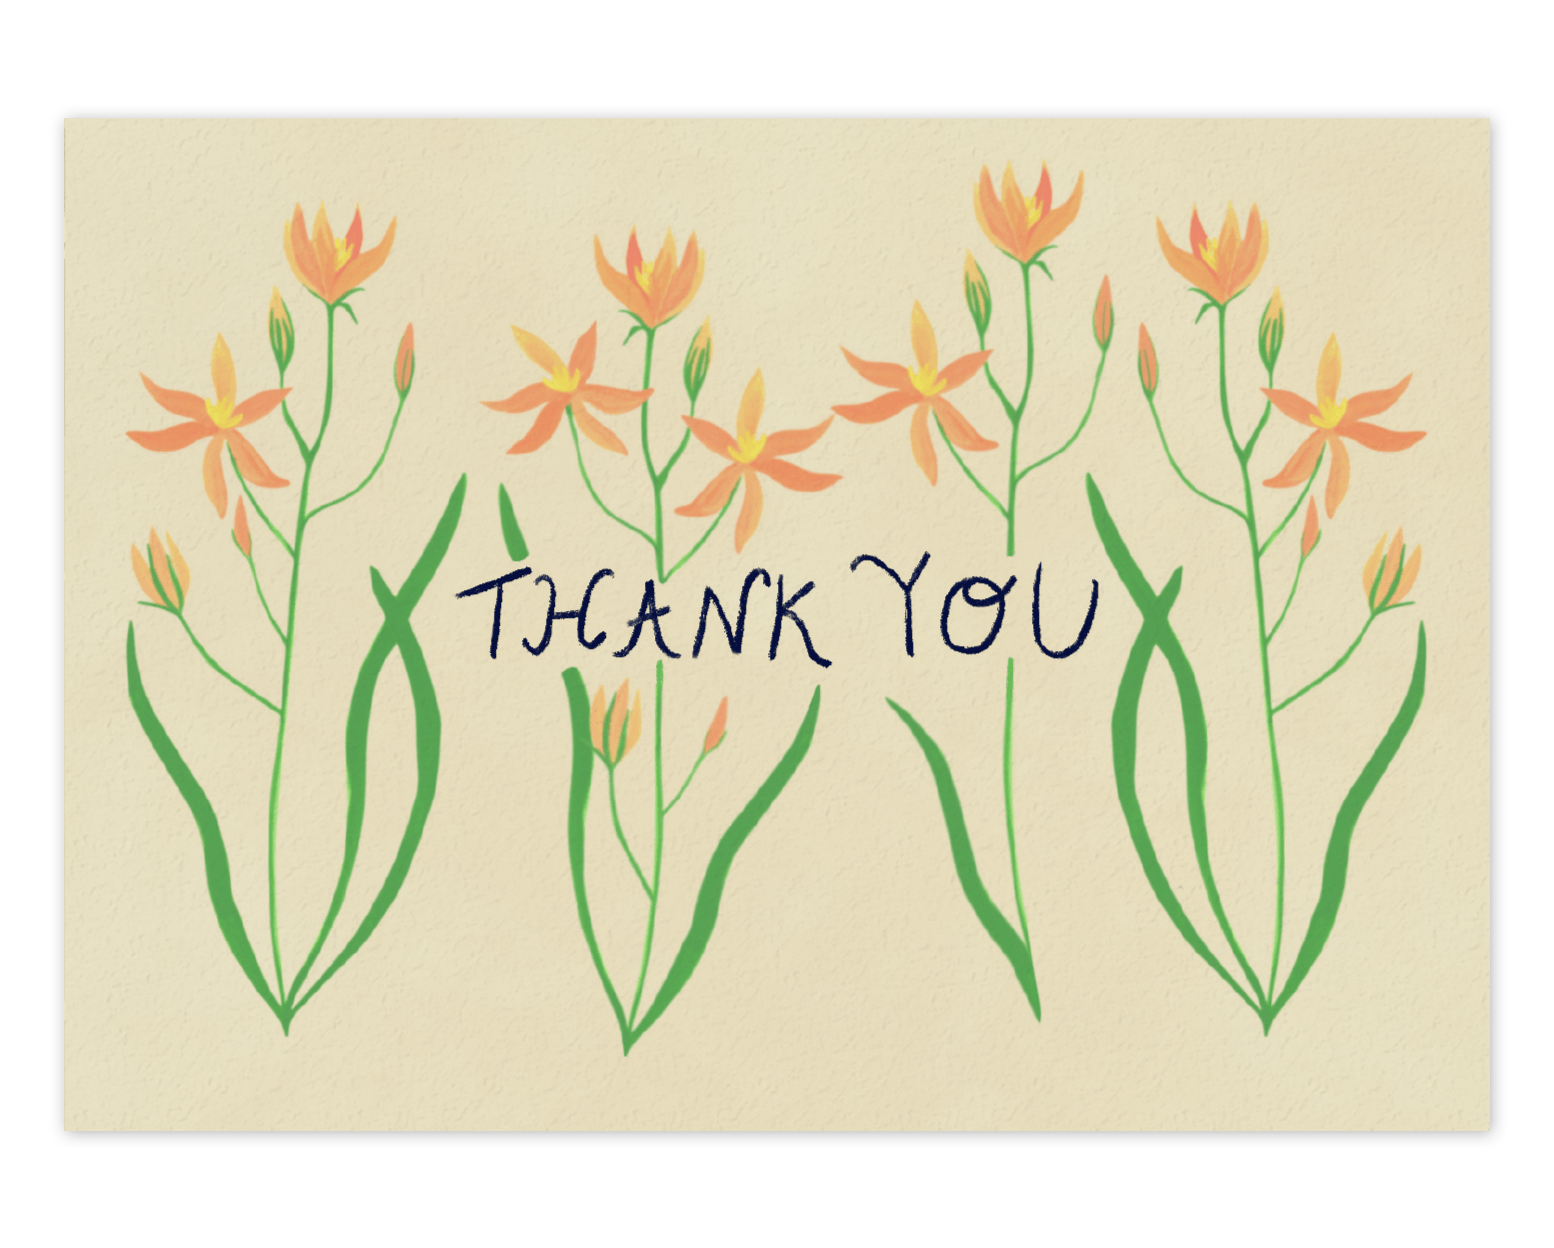 Four stems of orange forest flowers reaching upward cover the card nearly top to bottom horizontally, with the words &quot;Thank You&quot; going through the center of them in black ink. This design is printed on a cream colored background. 